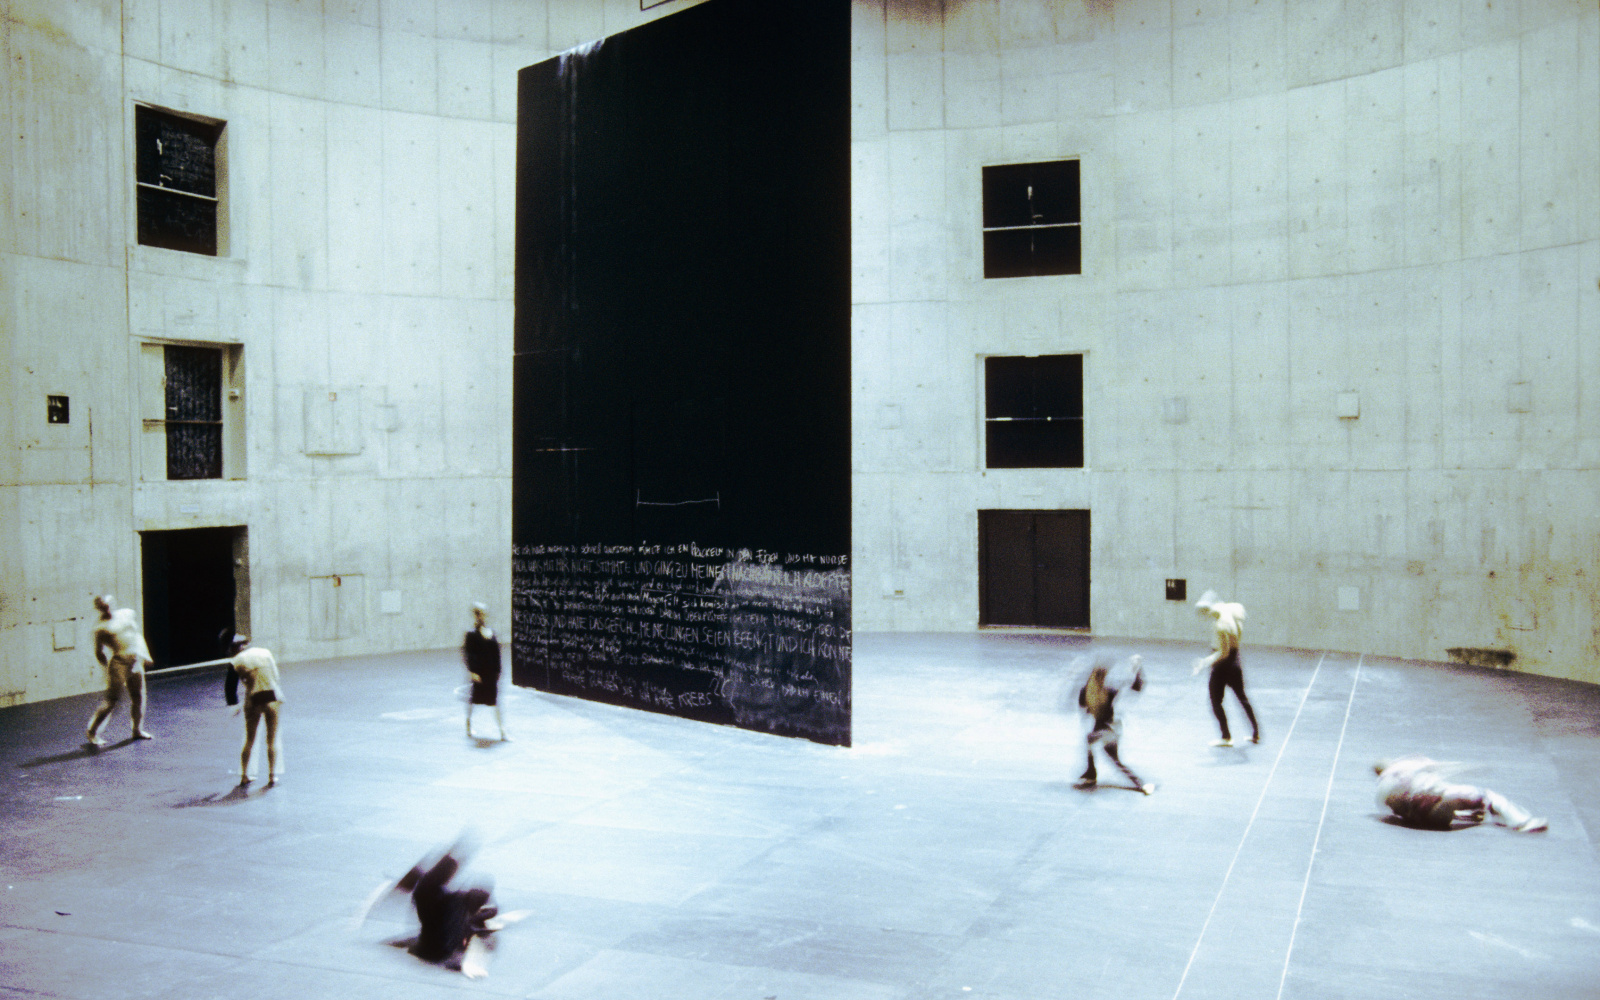 Seven dancers move around a large rectangular black wall that is structured a theatrical space.